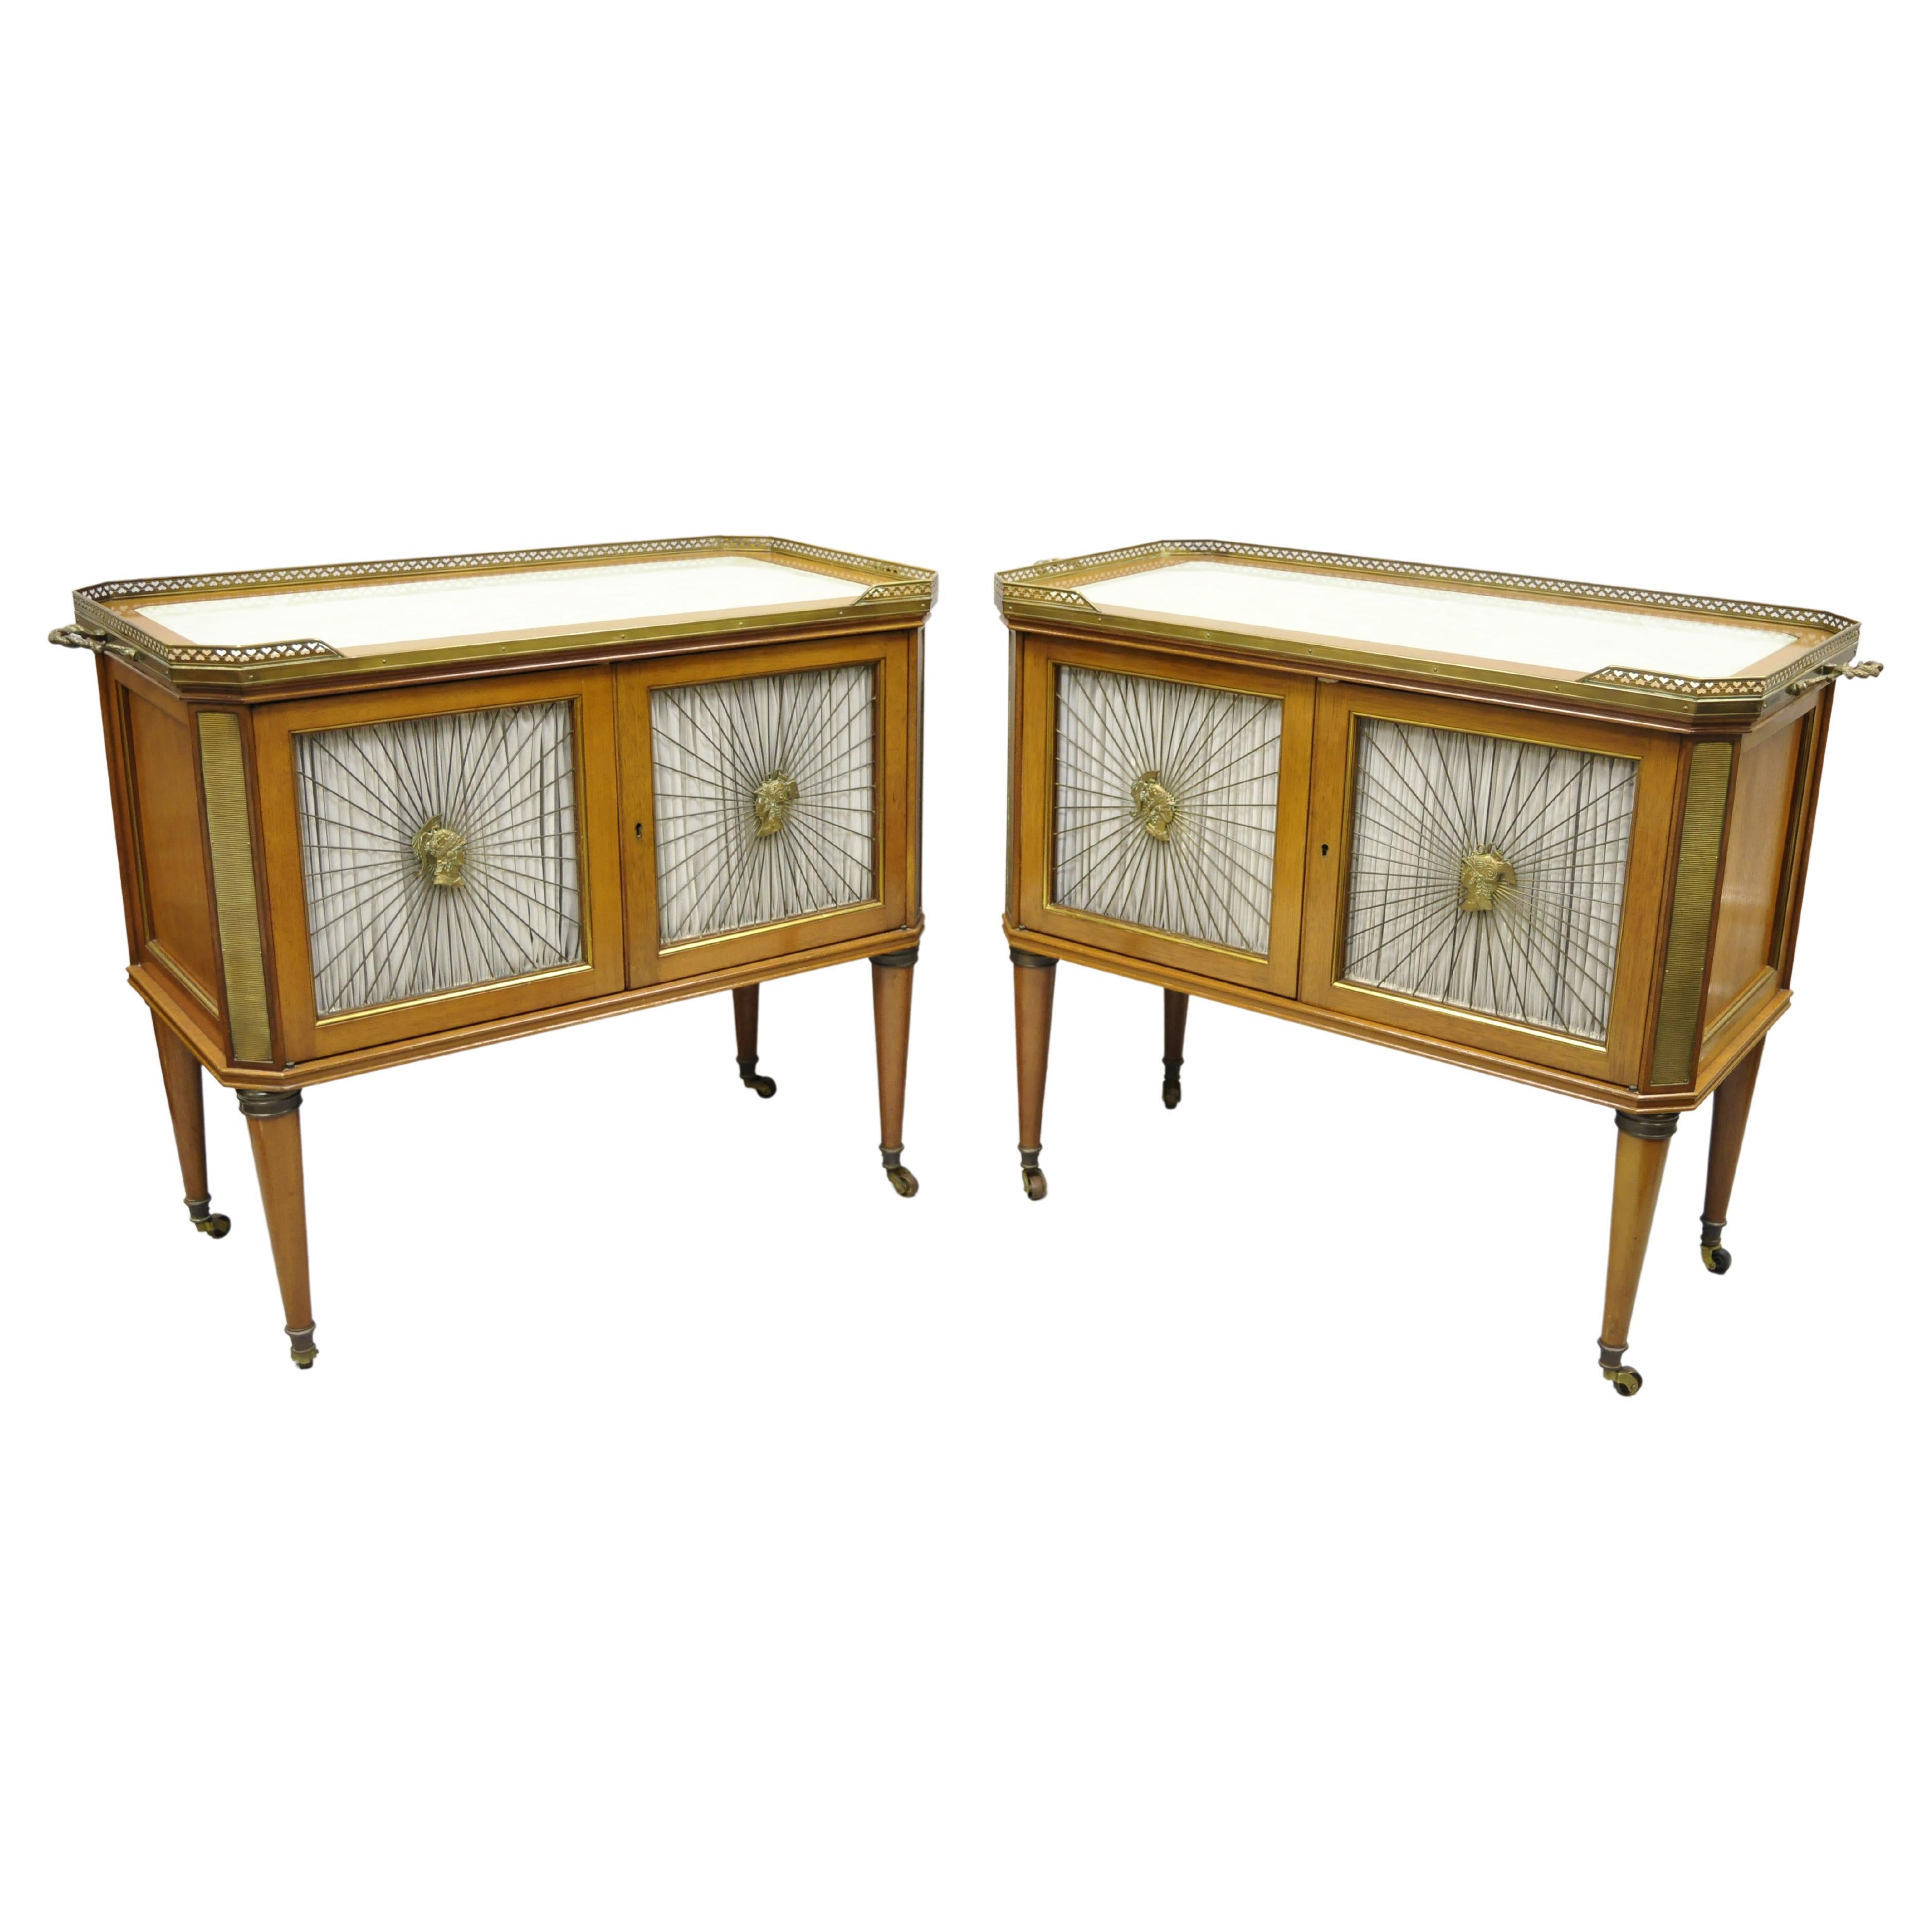 French Louis XVI Neoclassical Regency Mahogany Server Cabinet Tables, a Pair For Sale